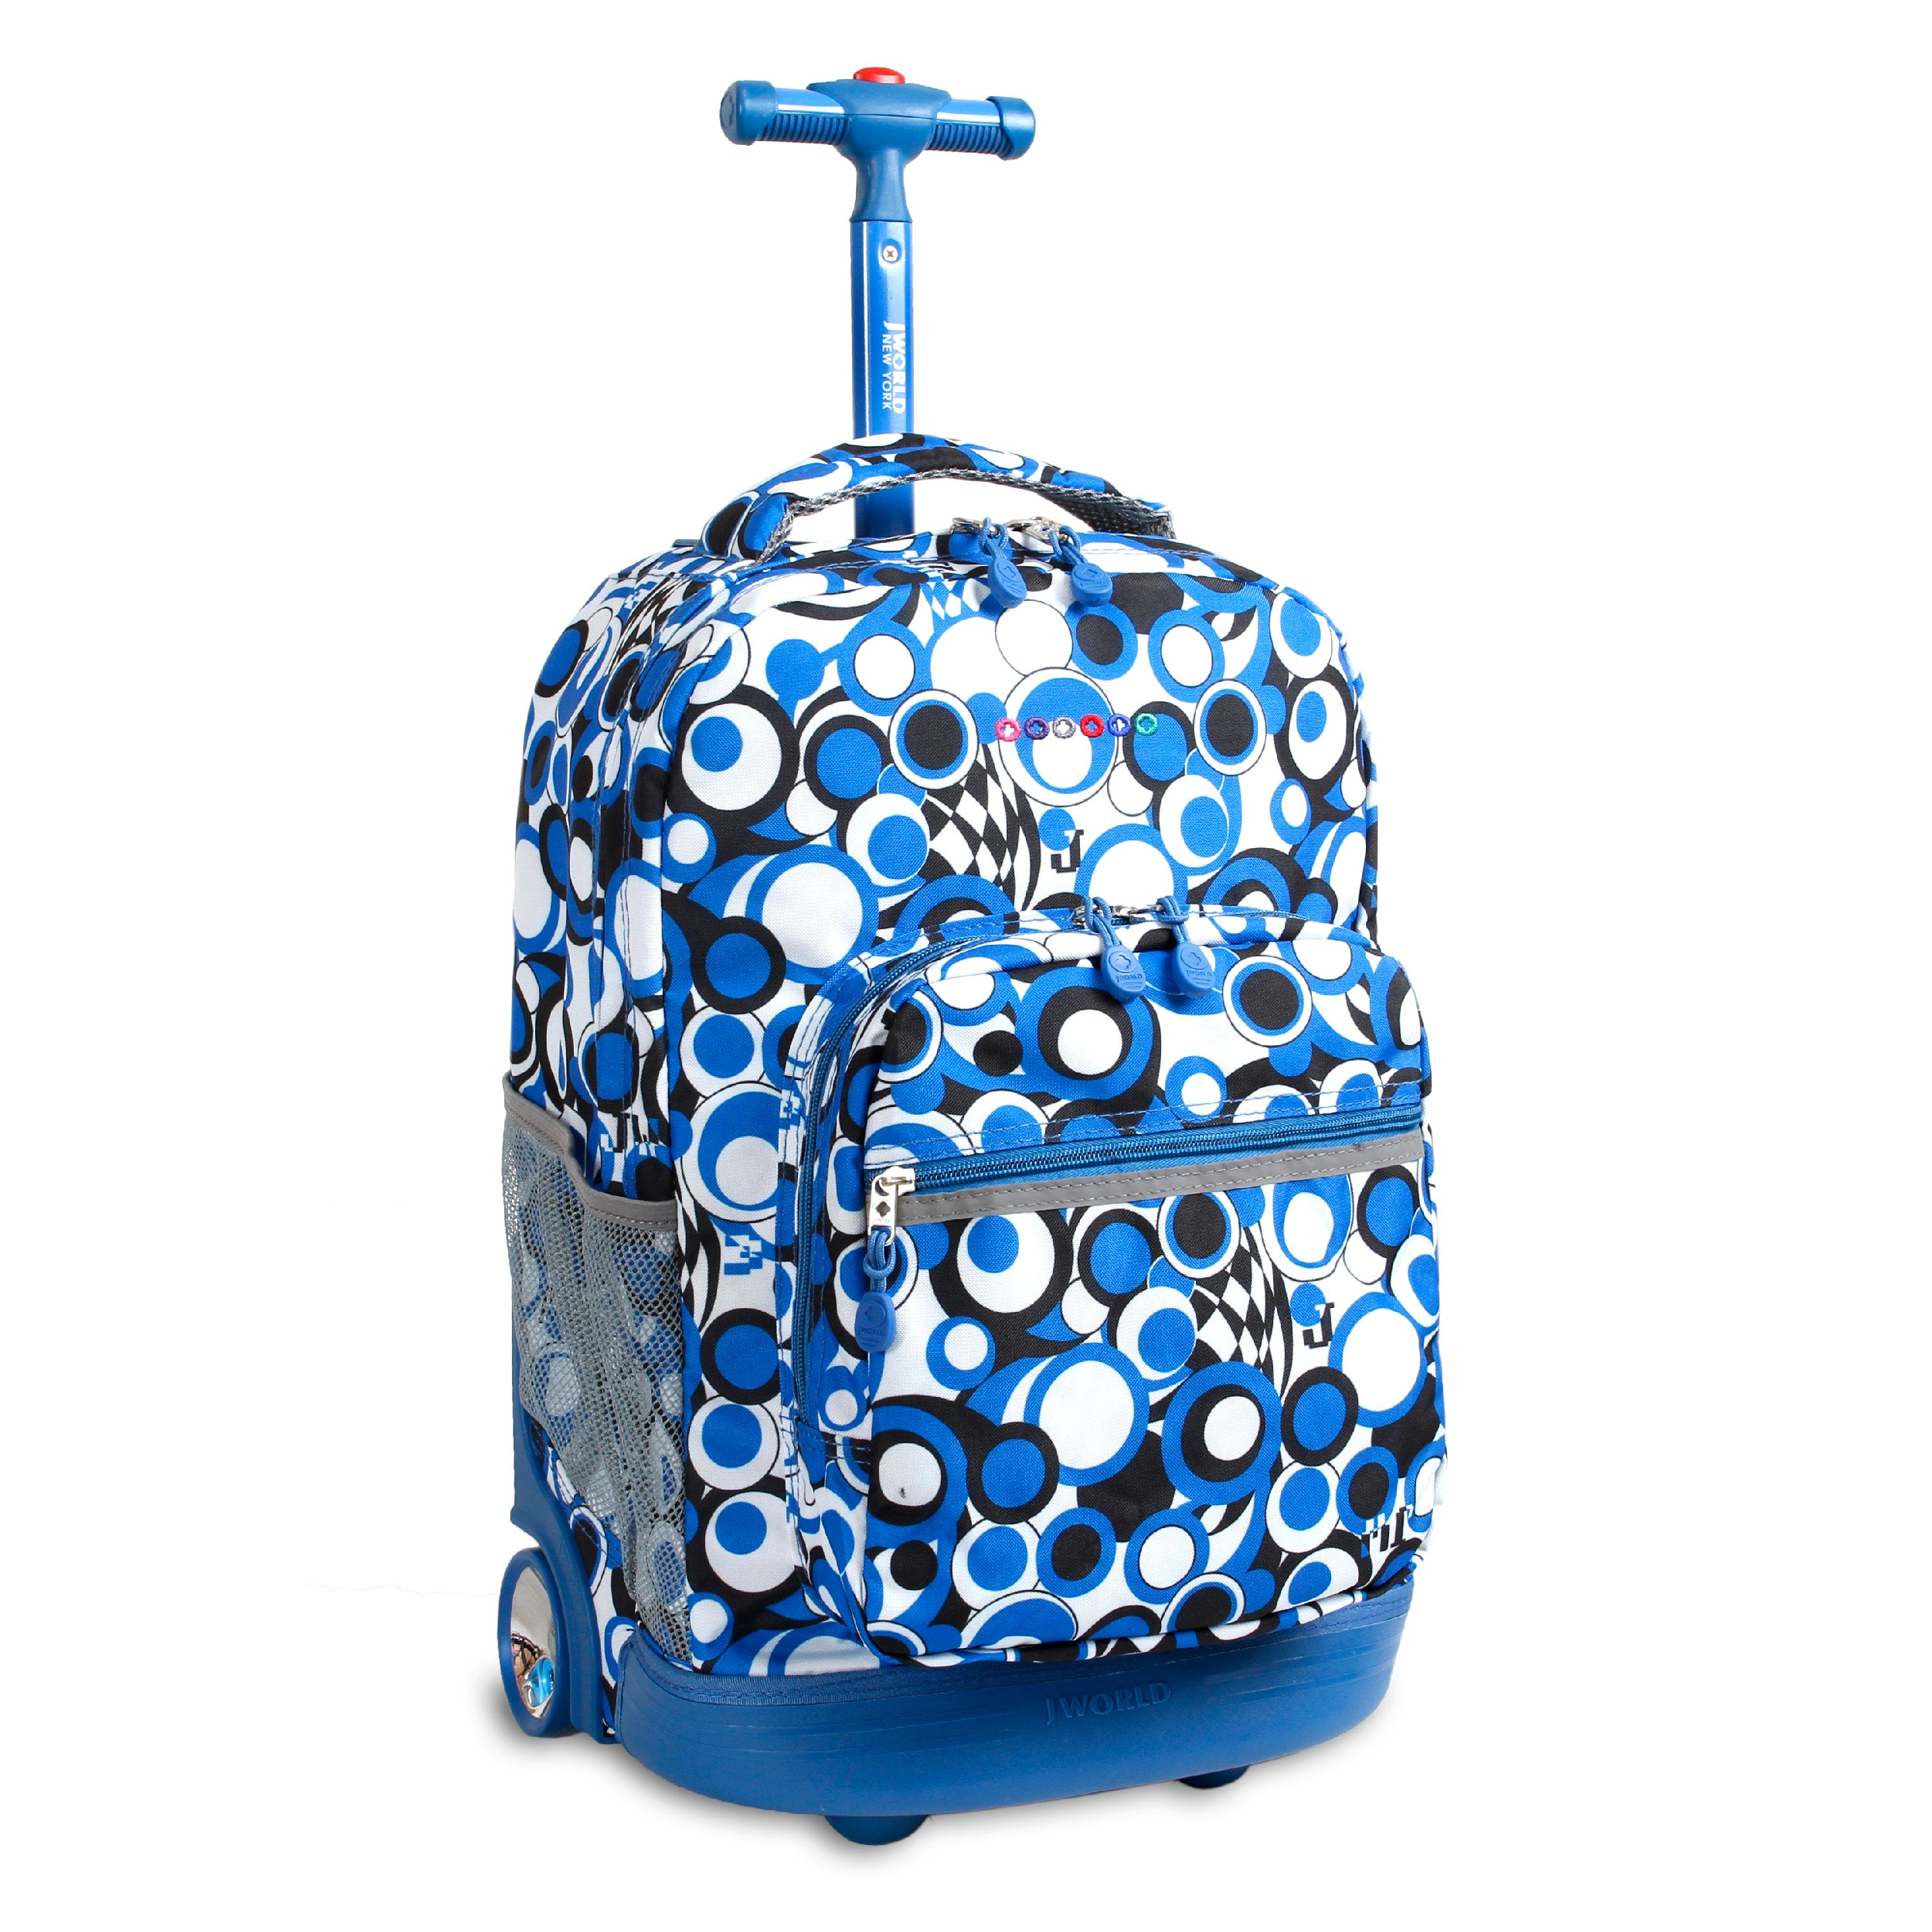 J World Boys And Girls Sunrise 18" Rolling Backpack For School And Travel, Chess Blue - image 1 of 5